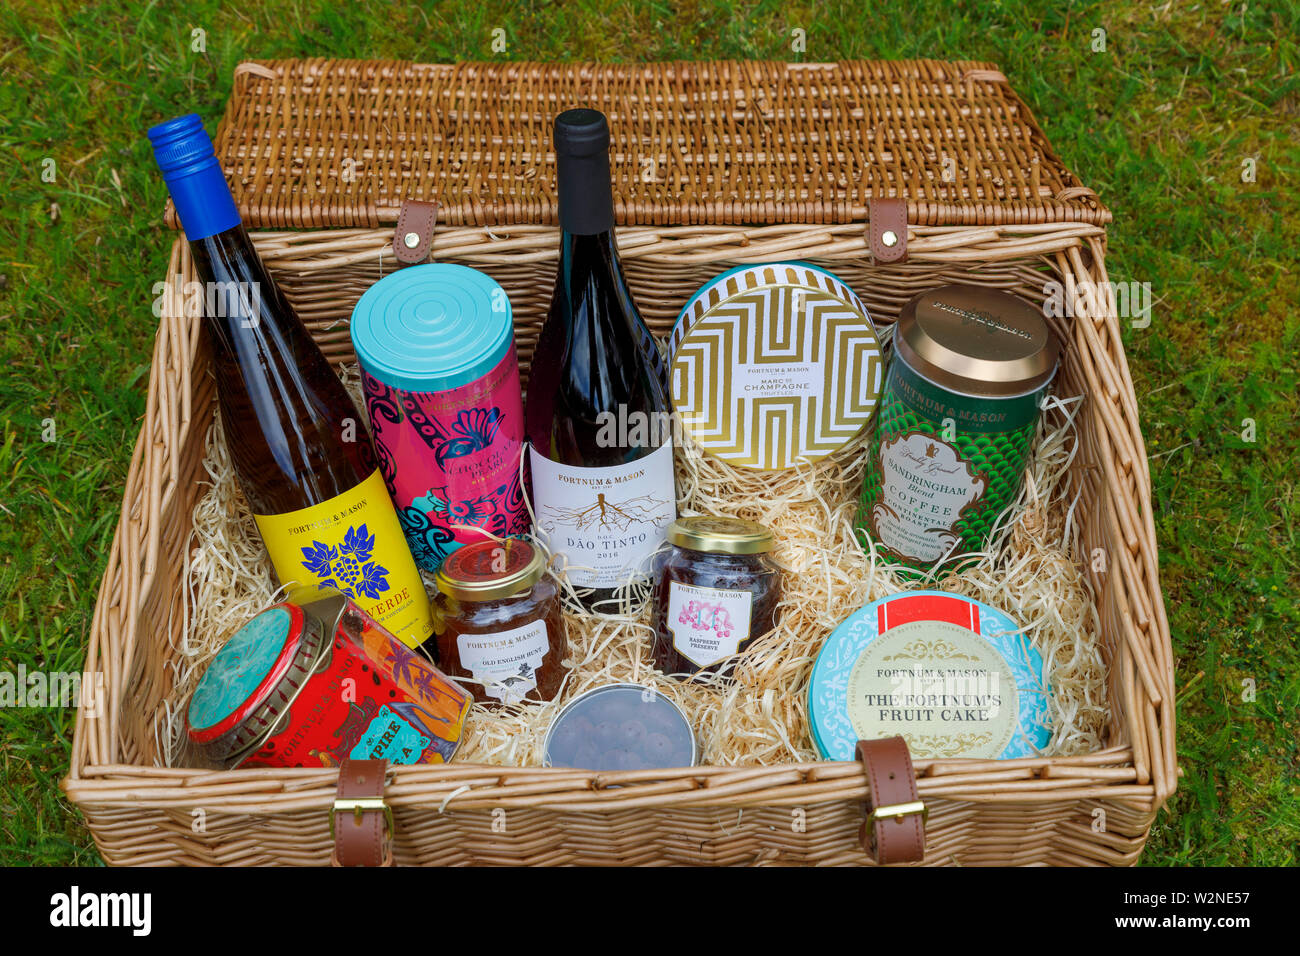 Luxury lifestyle: Fortnum & Mason traditional wicker basket picnic hamper  (the Grosvenor Hamper) with open top showing contents outdoors on grass  Stock Photo - Alamy